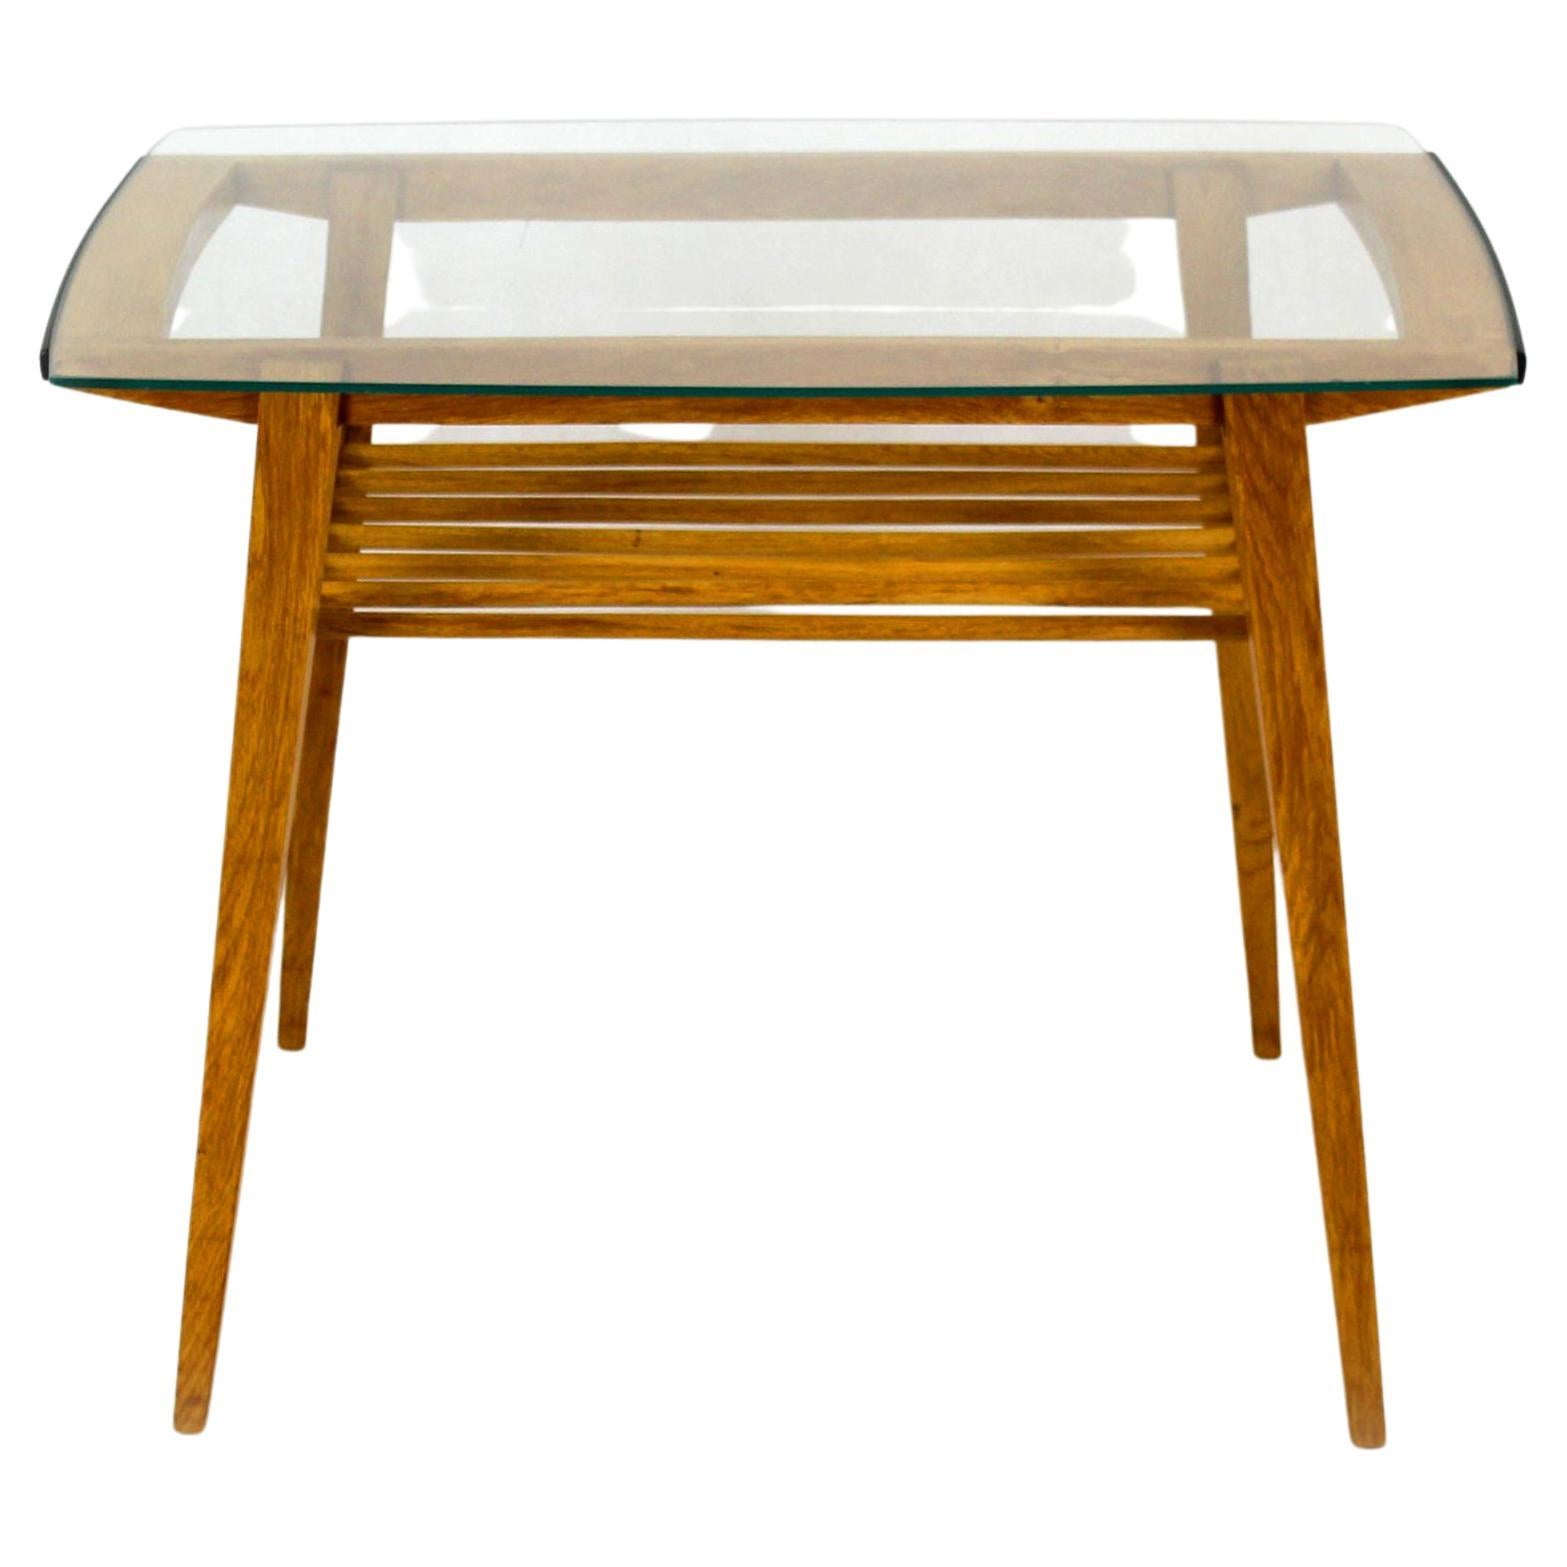 Restored Wooden Coffee Table with Glass Top from Druzstvo, 1960s For Sale